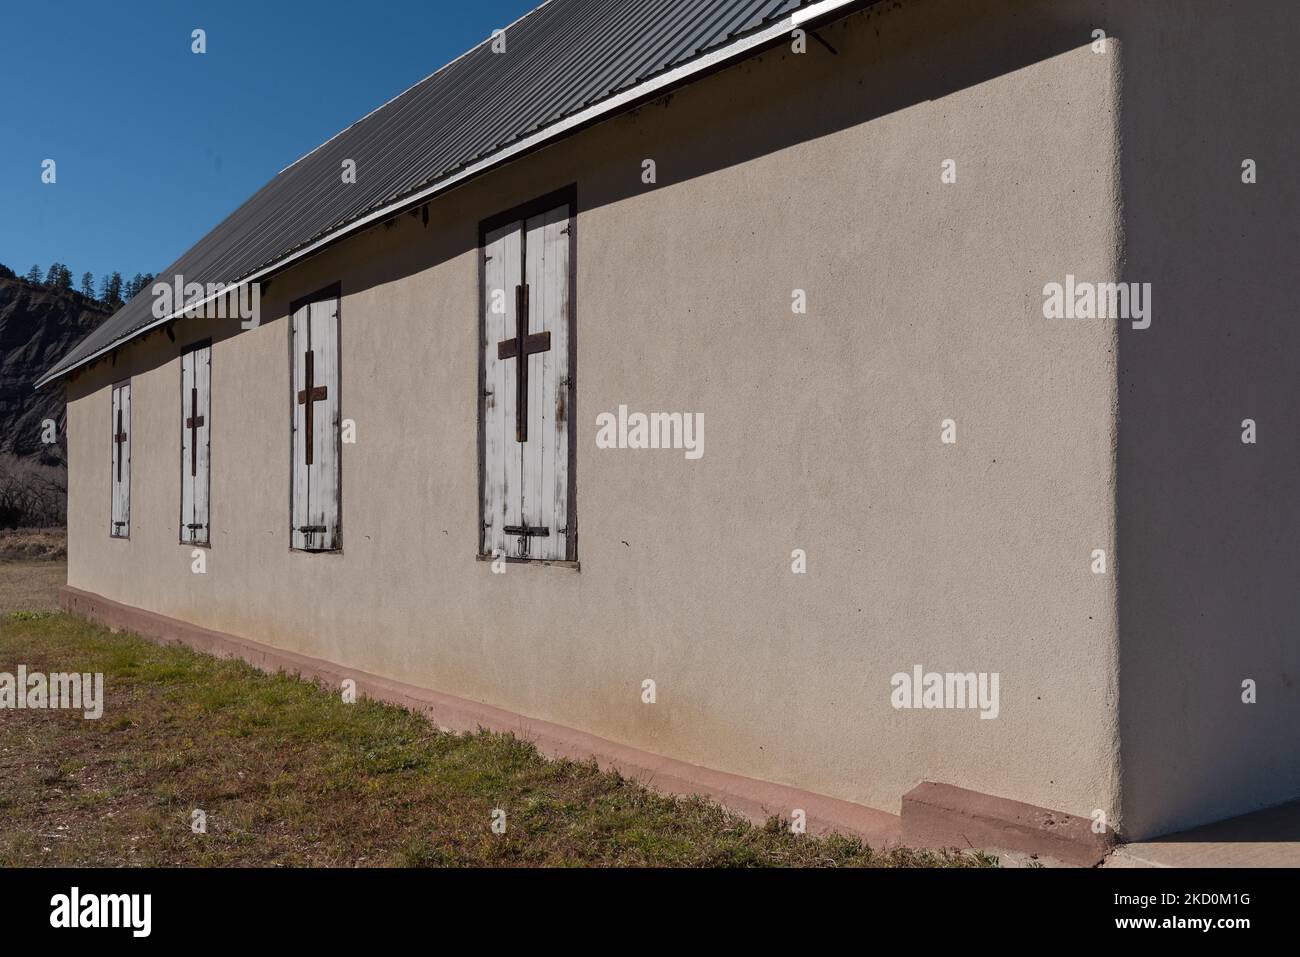 Crosses on window shutters of the adobe St. James the Apostle Mission in Trujillo, Colorado, United States. Stock Photo